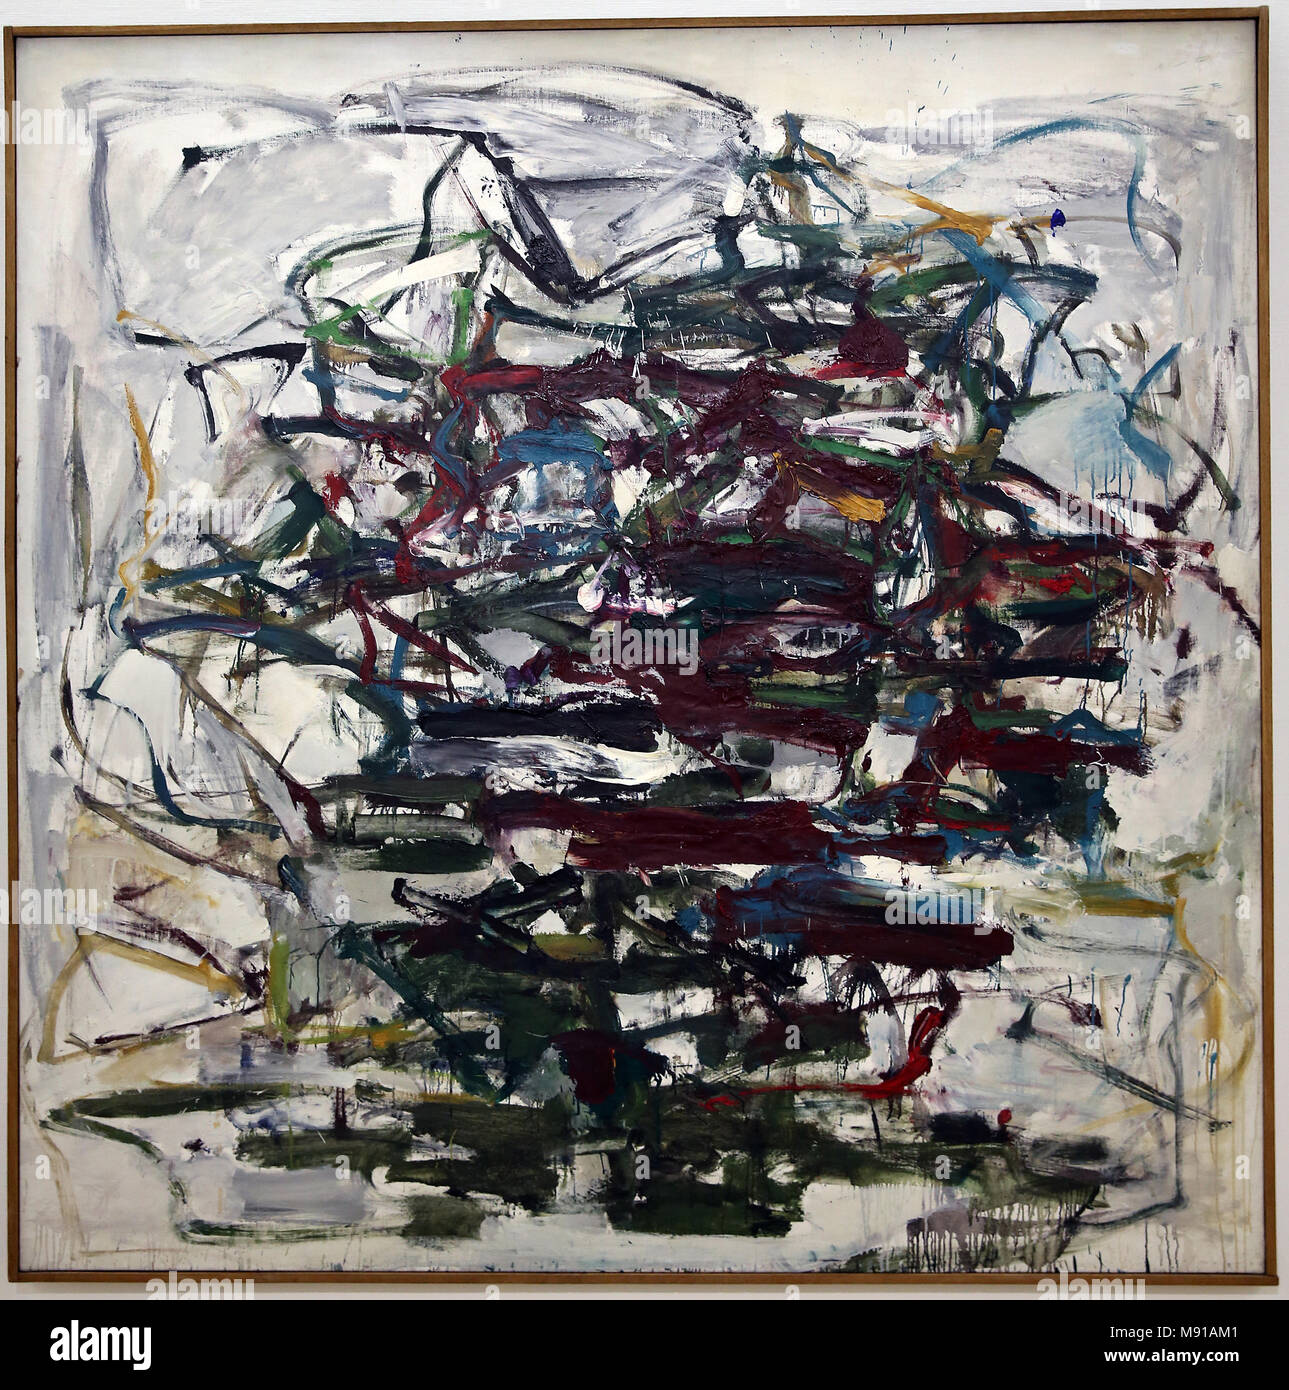 Musee National d'Art Moderne (National Modern art Museum), Georges Pompidou centre, Paris, France. Joan Mitchell, Painting, 1956-1957, oil on canvas. Stock Photo